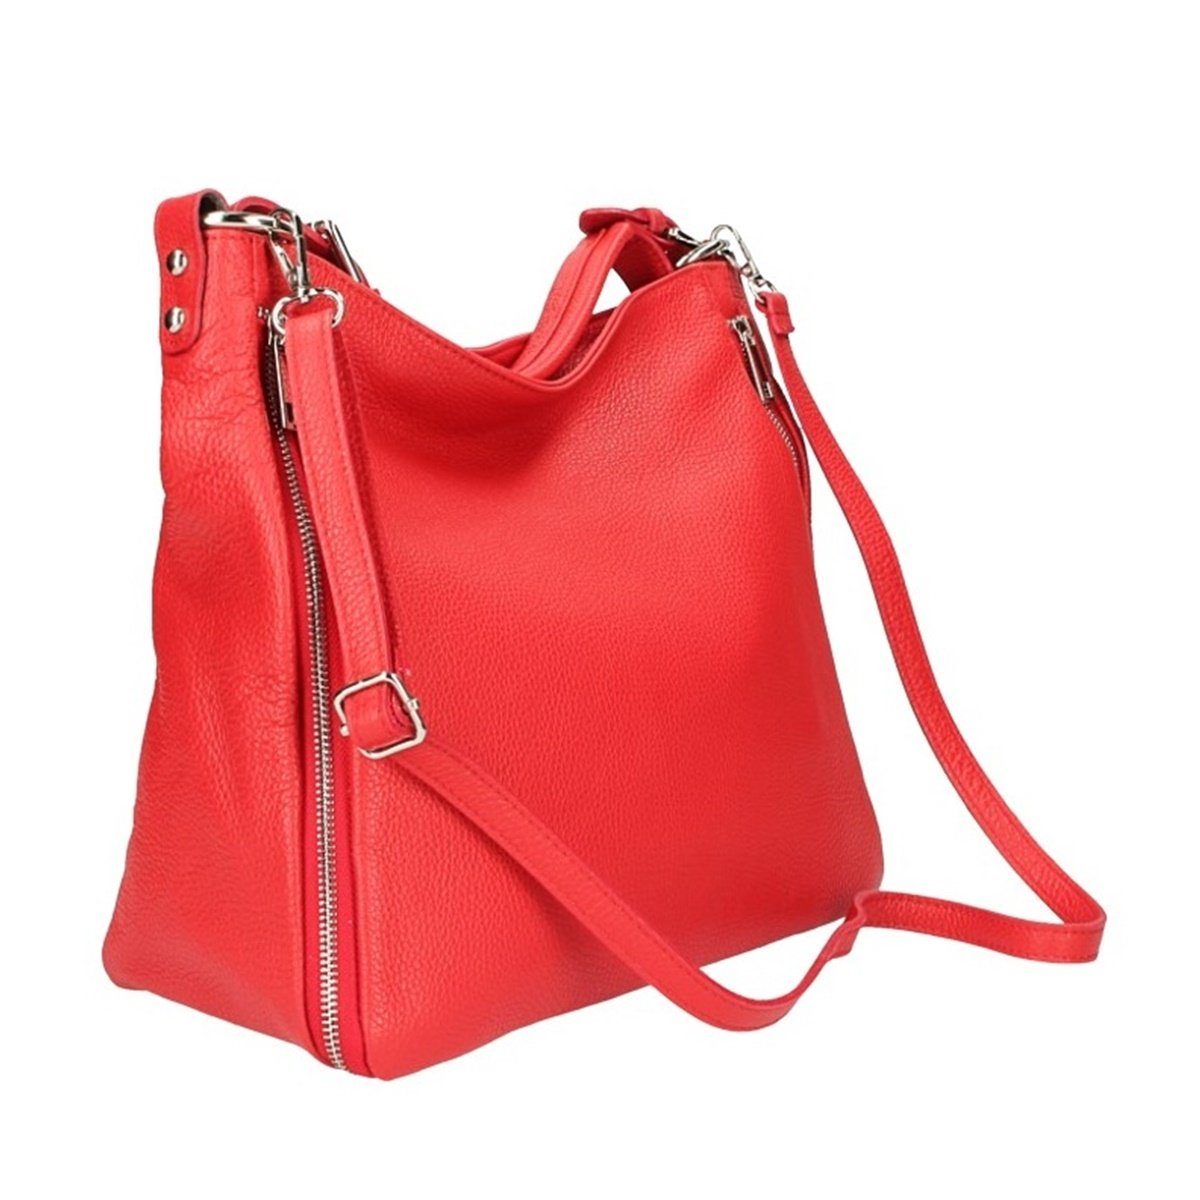 fs-bags Handtasche fs7142, Made in Italy Rot